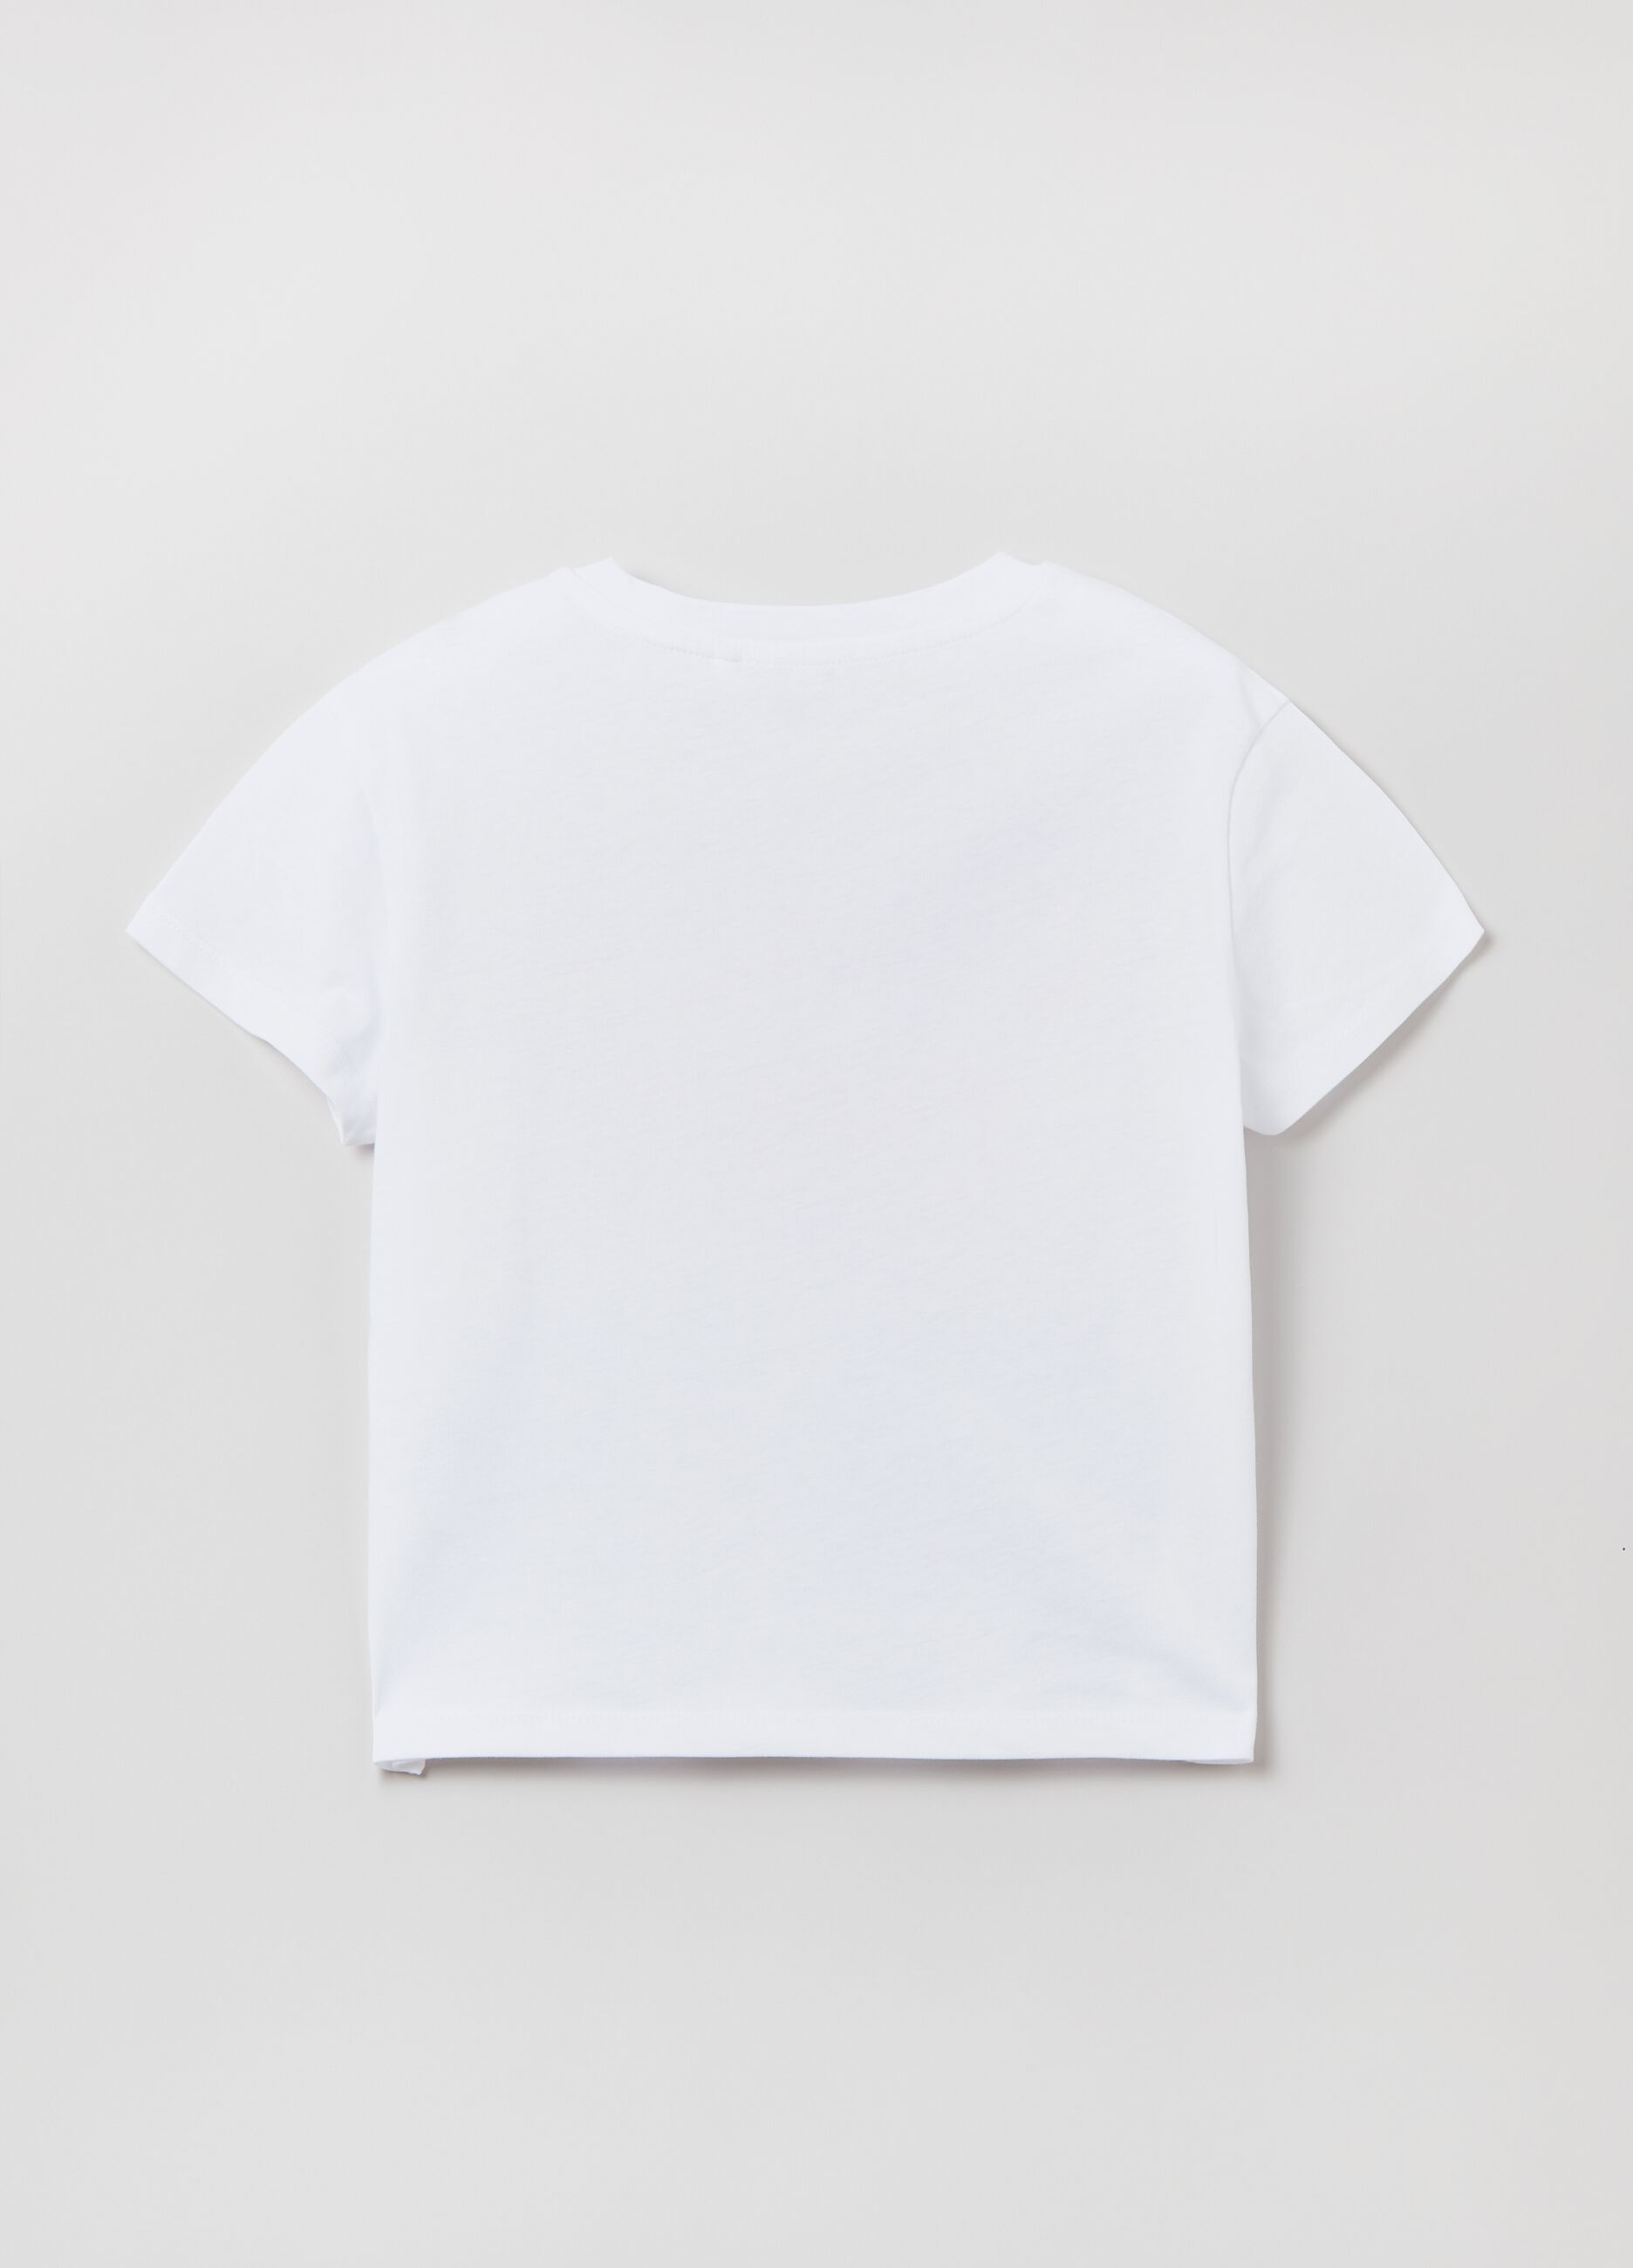 T-shirt with round neck and printed lettering